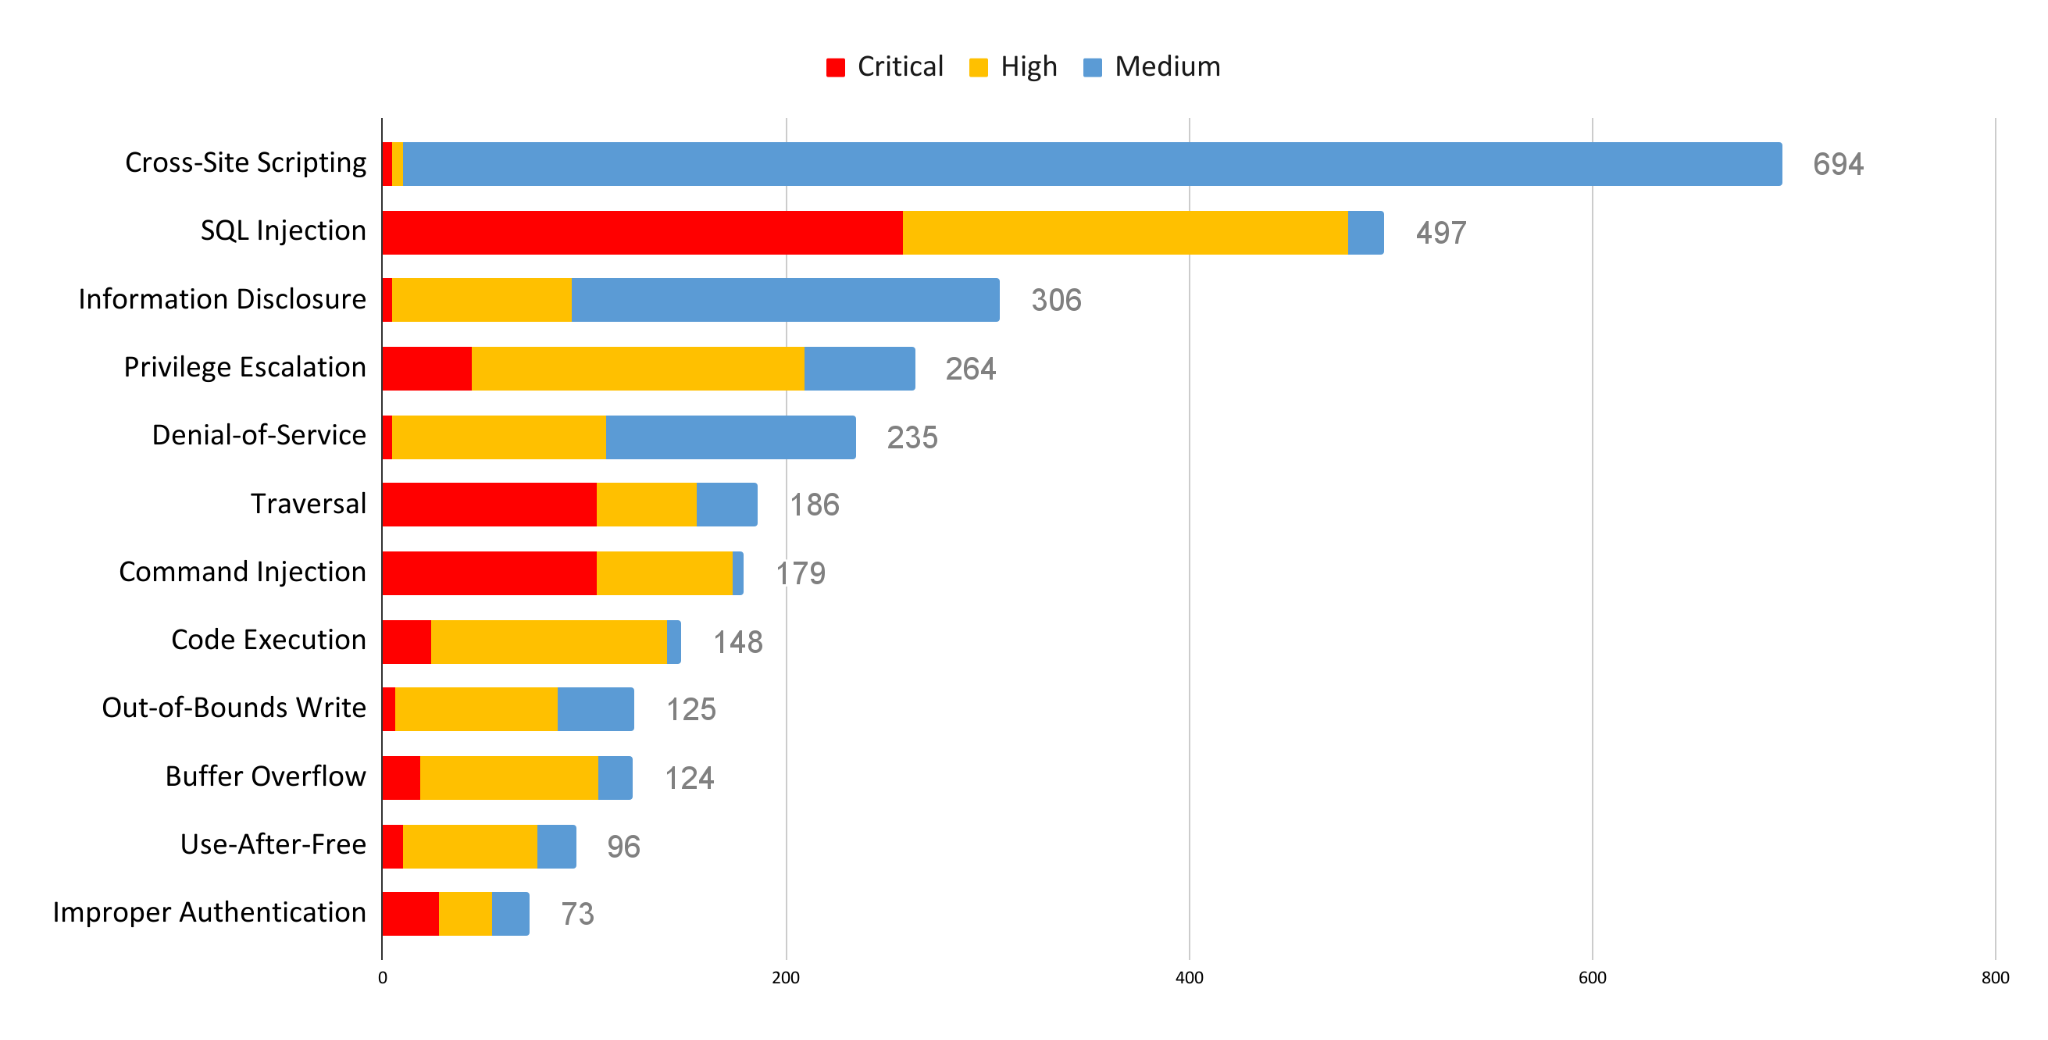 Red = critical, yellow = high, blue = medium. In order from most to least prevalent vulnerability category: cross-site scripting, SQL injection, information disclosure, privilege escalation, denial of service, traversal, command injection, code execution, out-of-bounds write, buffer overflow, use-after-free, improper authentication.